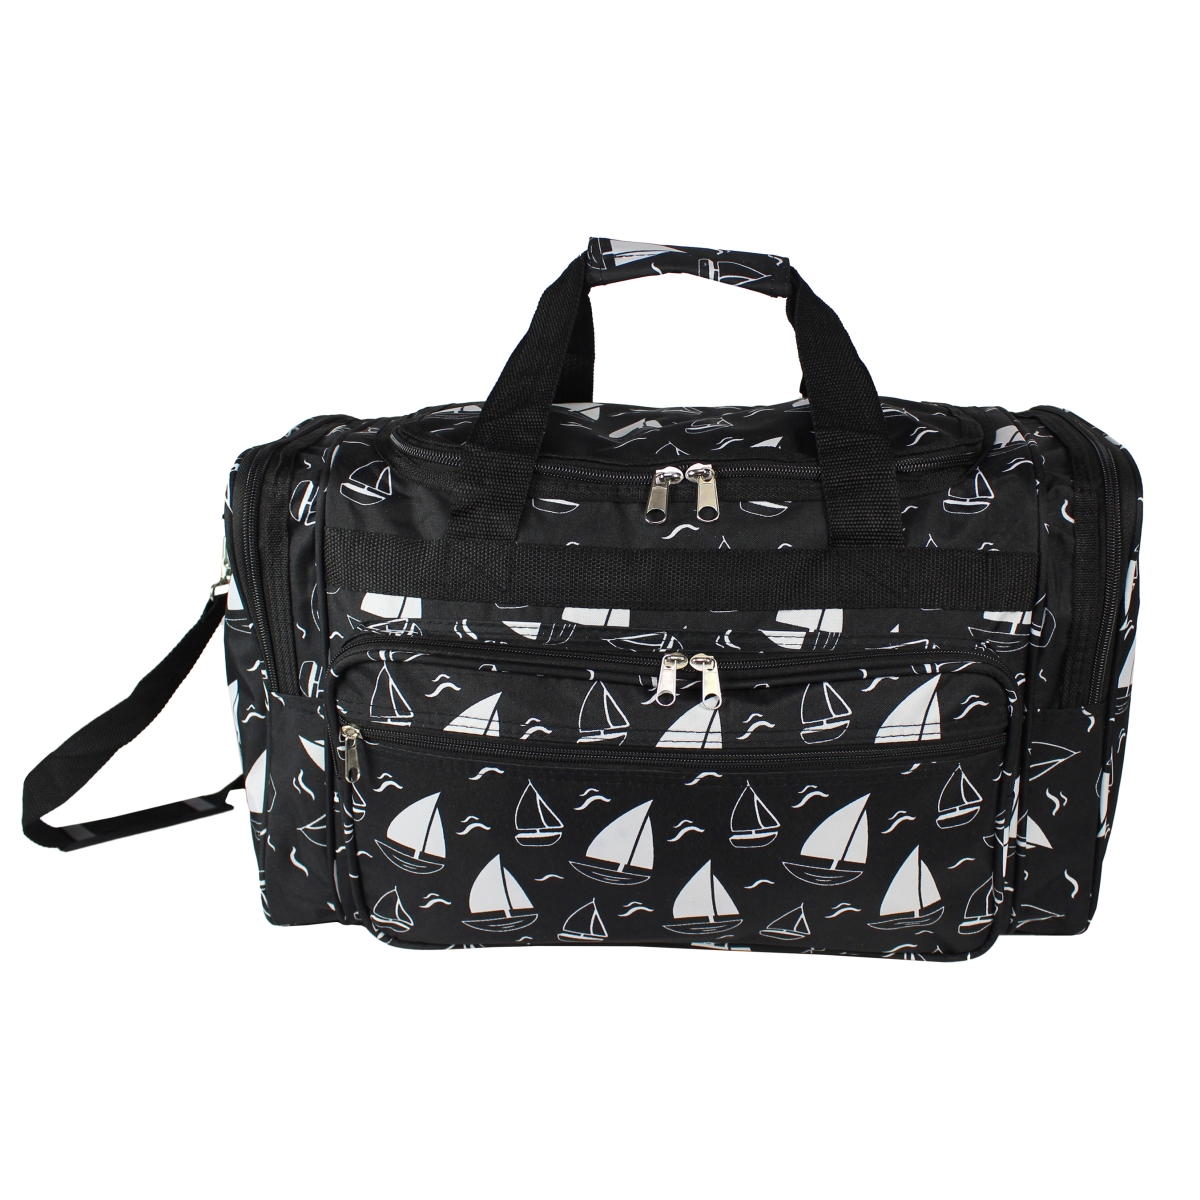 81t22-232 22 In. Carry-on Duffel Bag - Sailboat